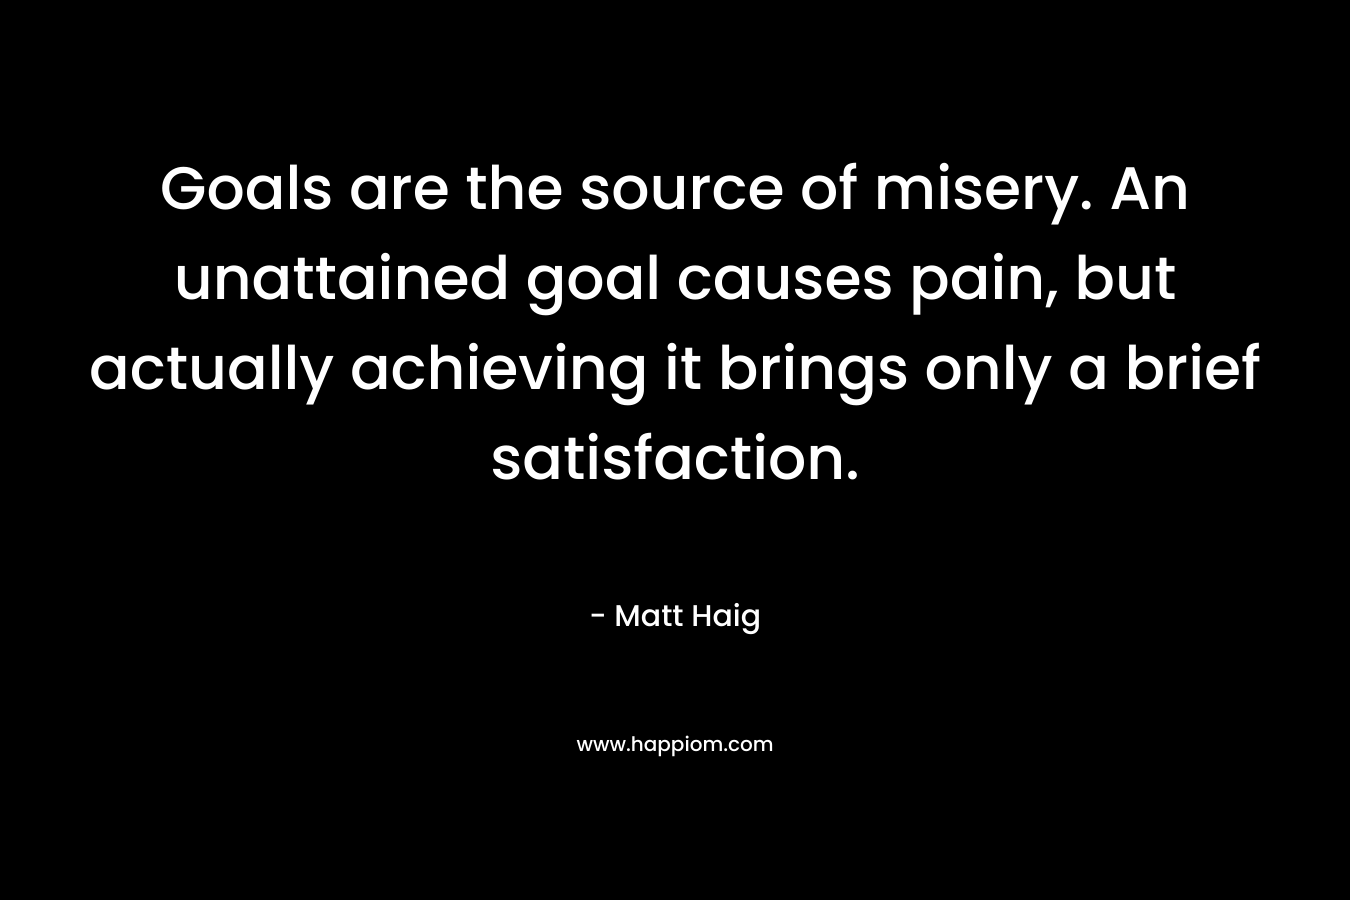 Goals are the source of misery. An unattained goal causes pain, but actually achieving it brings only a brief satisfaction. – Matt Haig